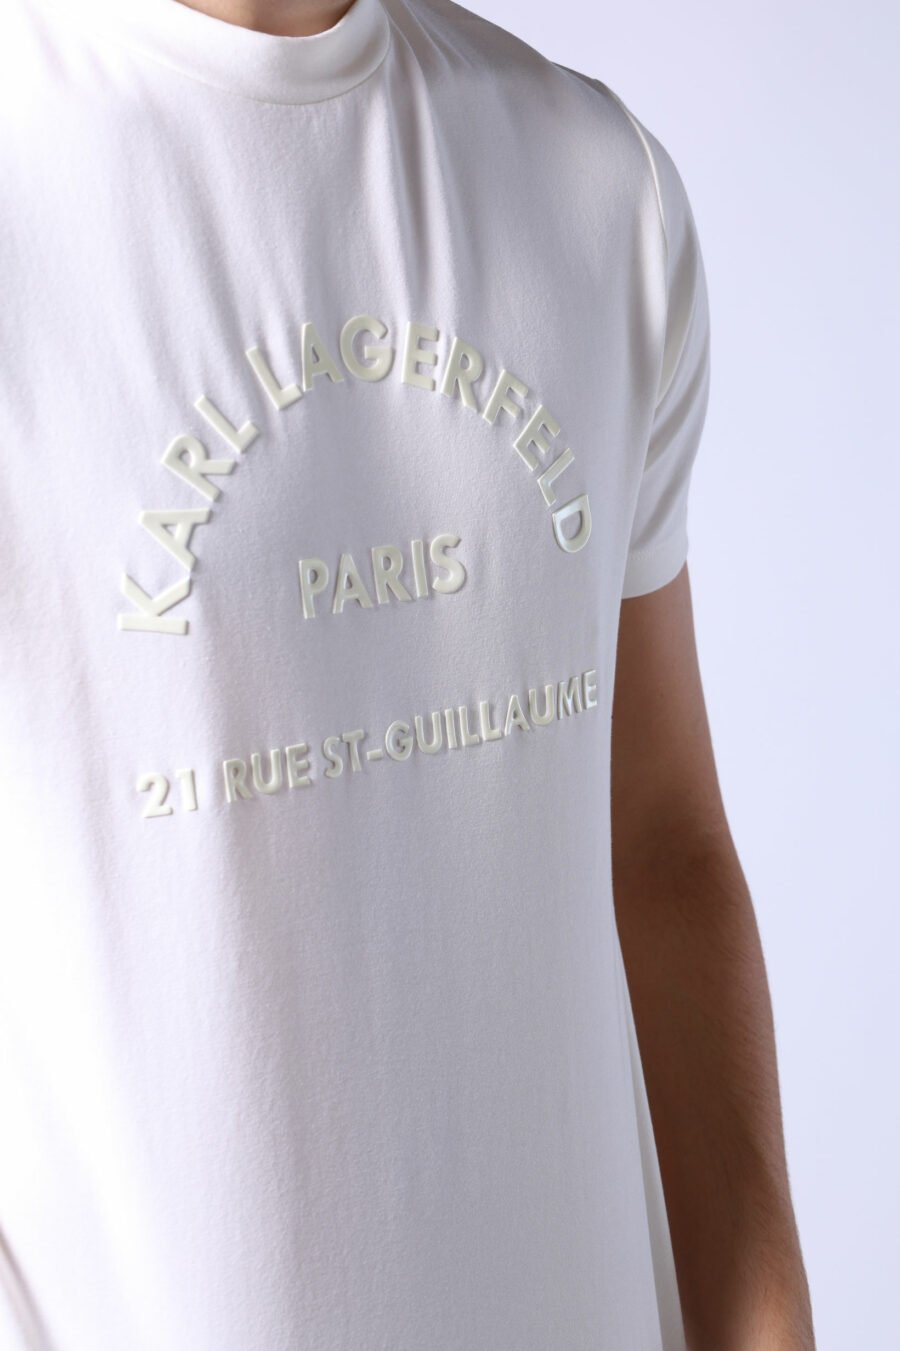 White T-shirt with monochrome "rue st guillaume" maxi logo - Untitled Catalog 05761